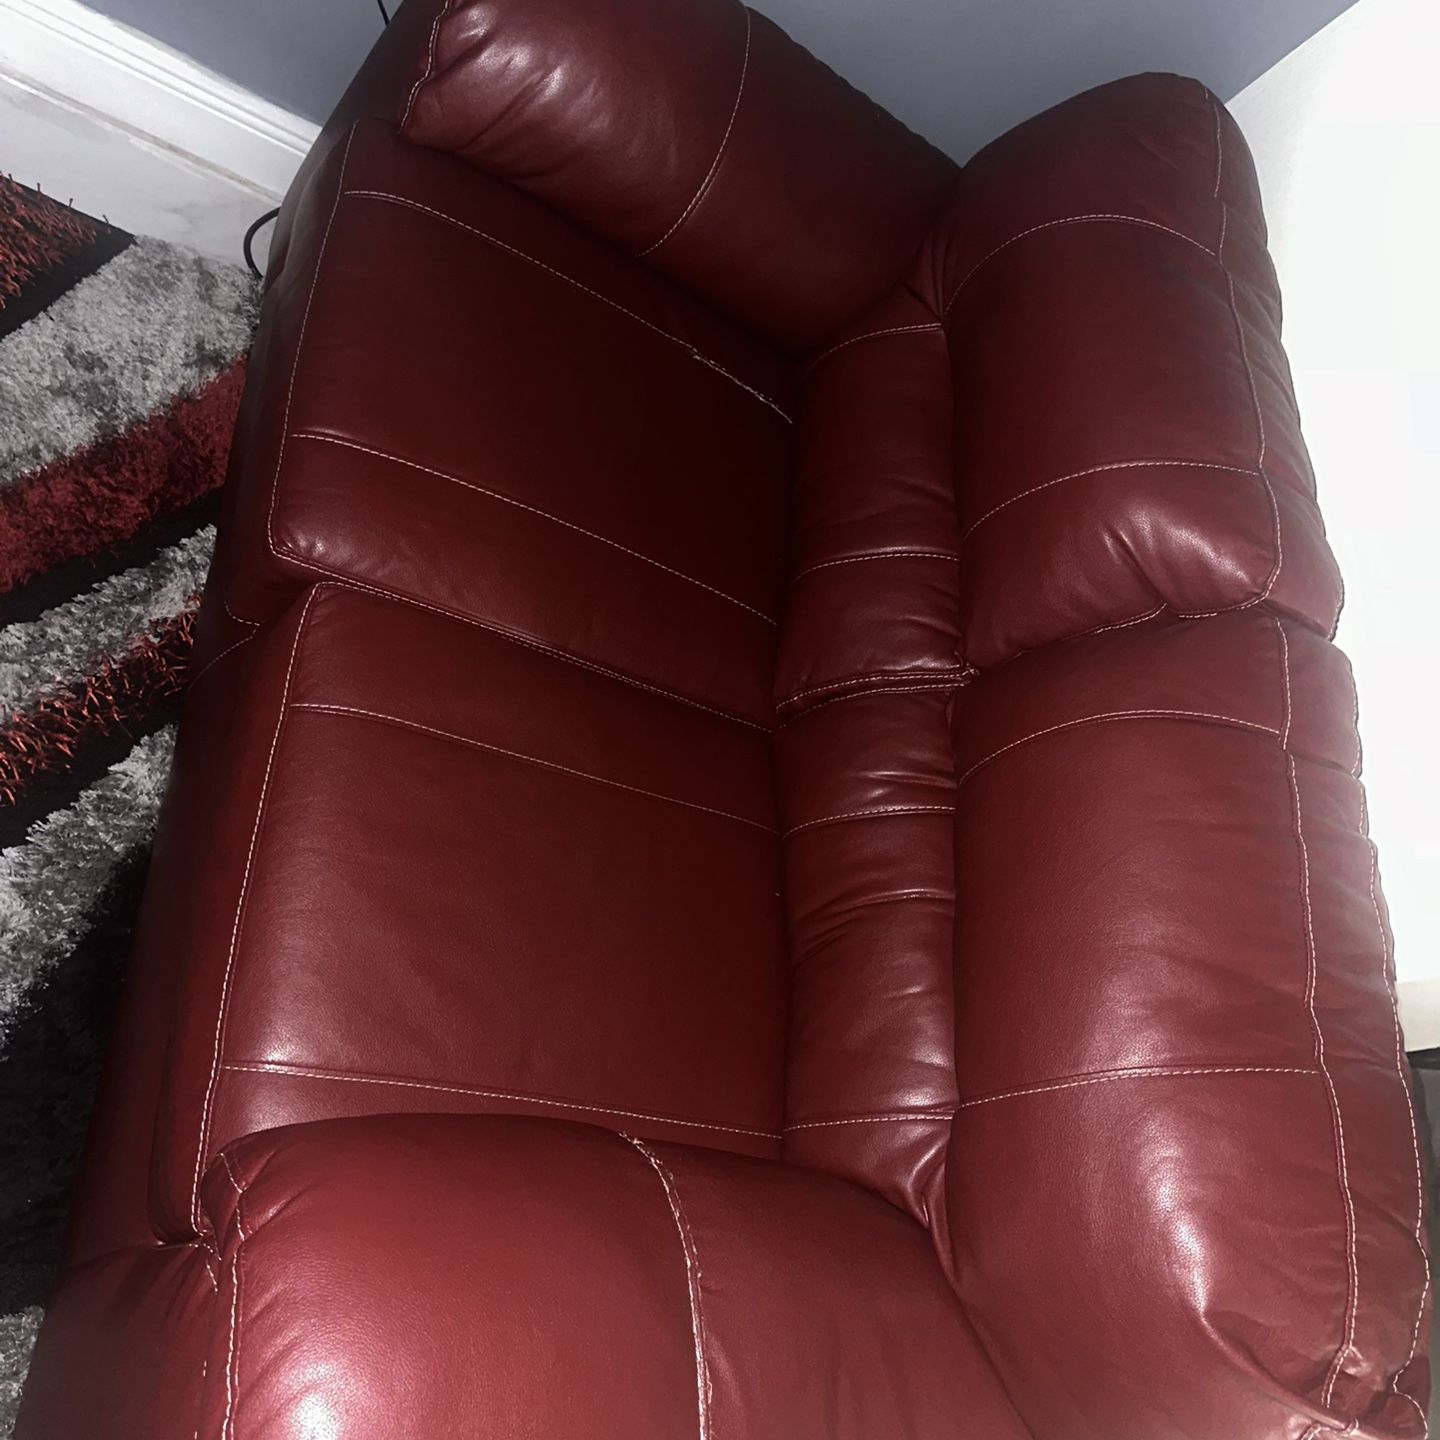 2 Couches For Sale (Red) Living Room Set (2)